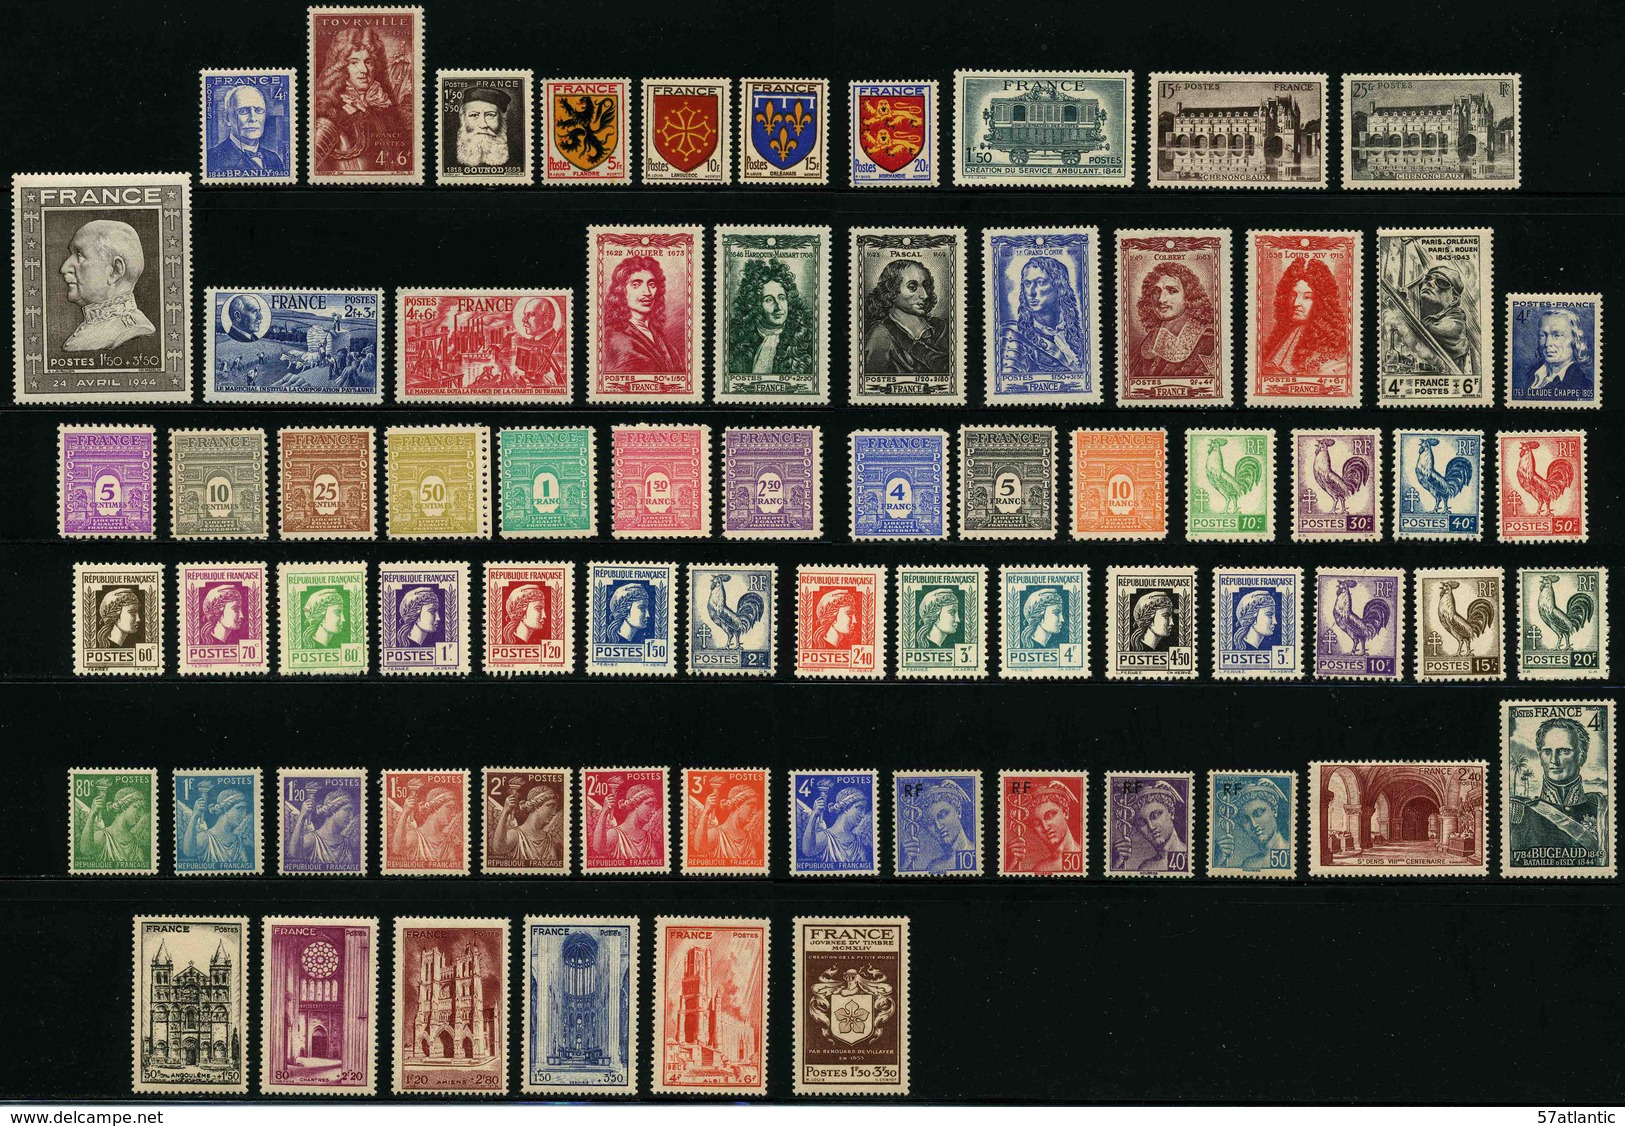 FRANCE - ANNEE COMPLETE 1944 - YT 599 à 668 ** - 70 TIMBRES NEUFS ** - 1940-1949